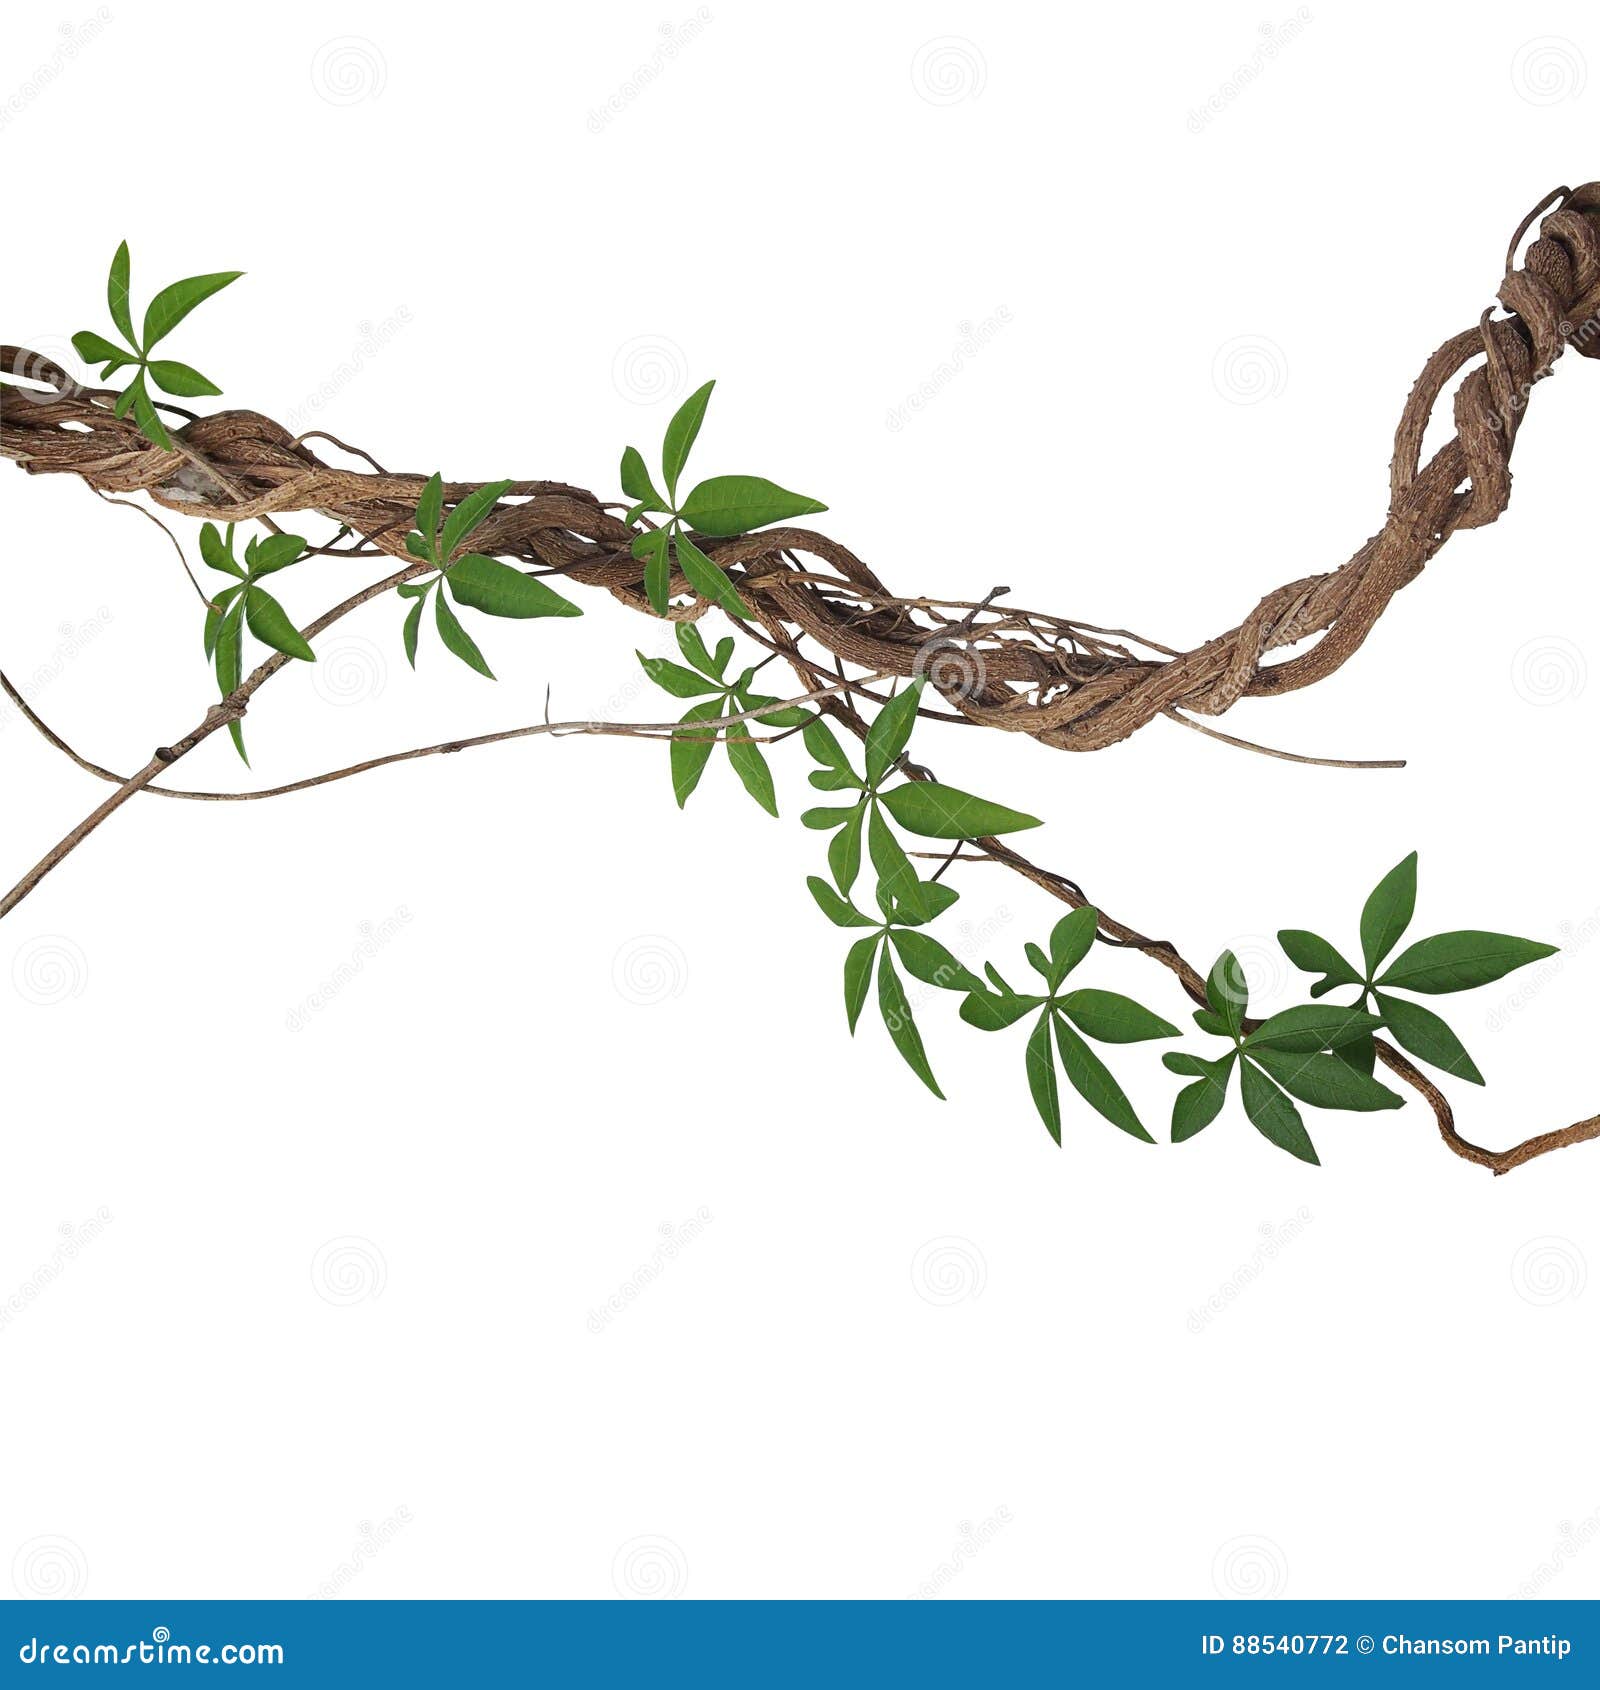 twisted big jungle vines with leaves of wild morning glory liana plant  on white background, clipping path included.